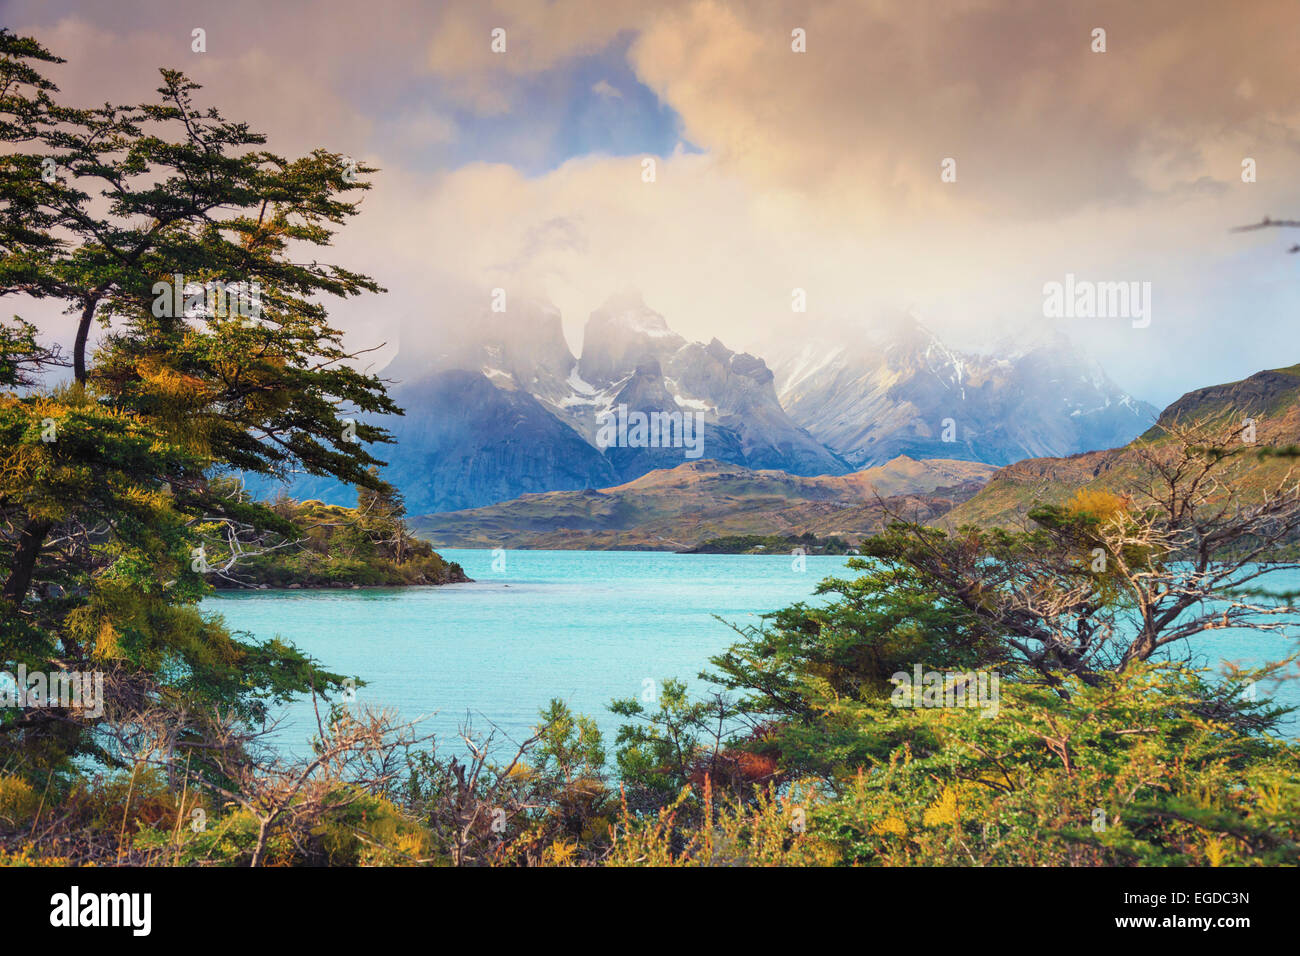 Chile, Patagonien, Torres del Paine Nationalpark (UNESCO-Website), See Peohe Stockfoto